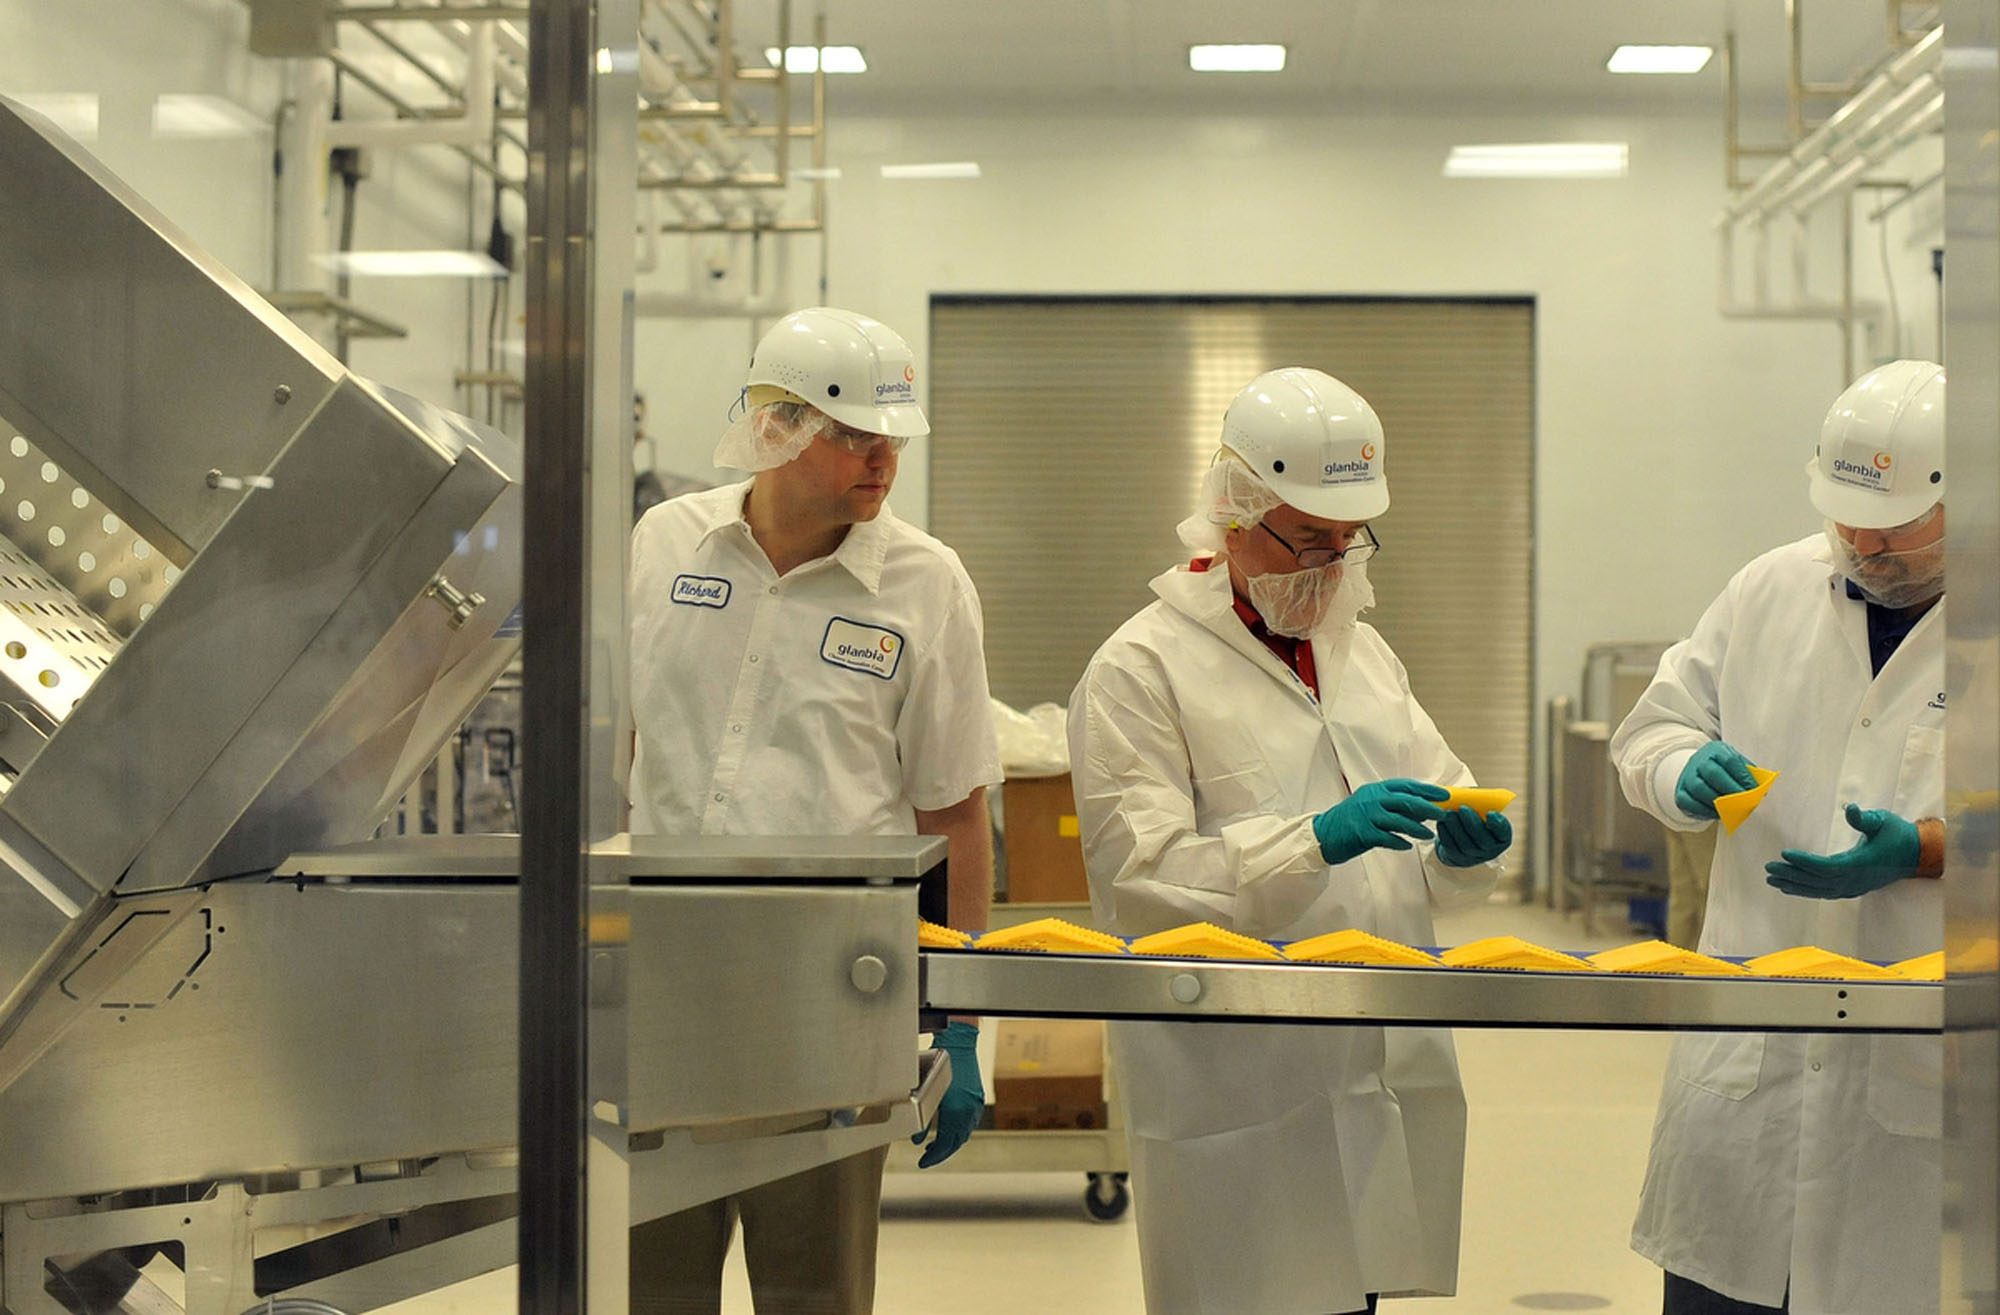 Workers at Glanbia Foods’ new state-of-the-art Cheese Innovation Center in Twin Falls, Idaho.  Photo credit:  Ed Glazar, Times-News